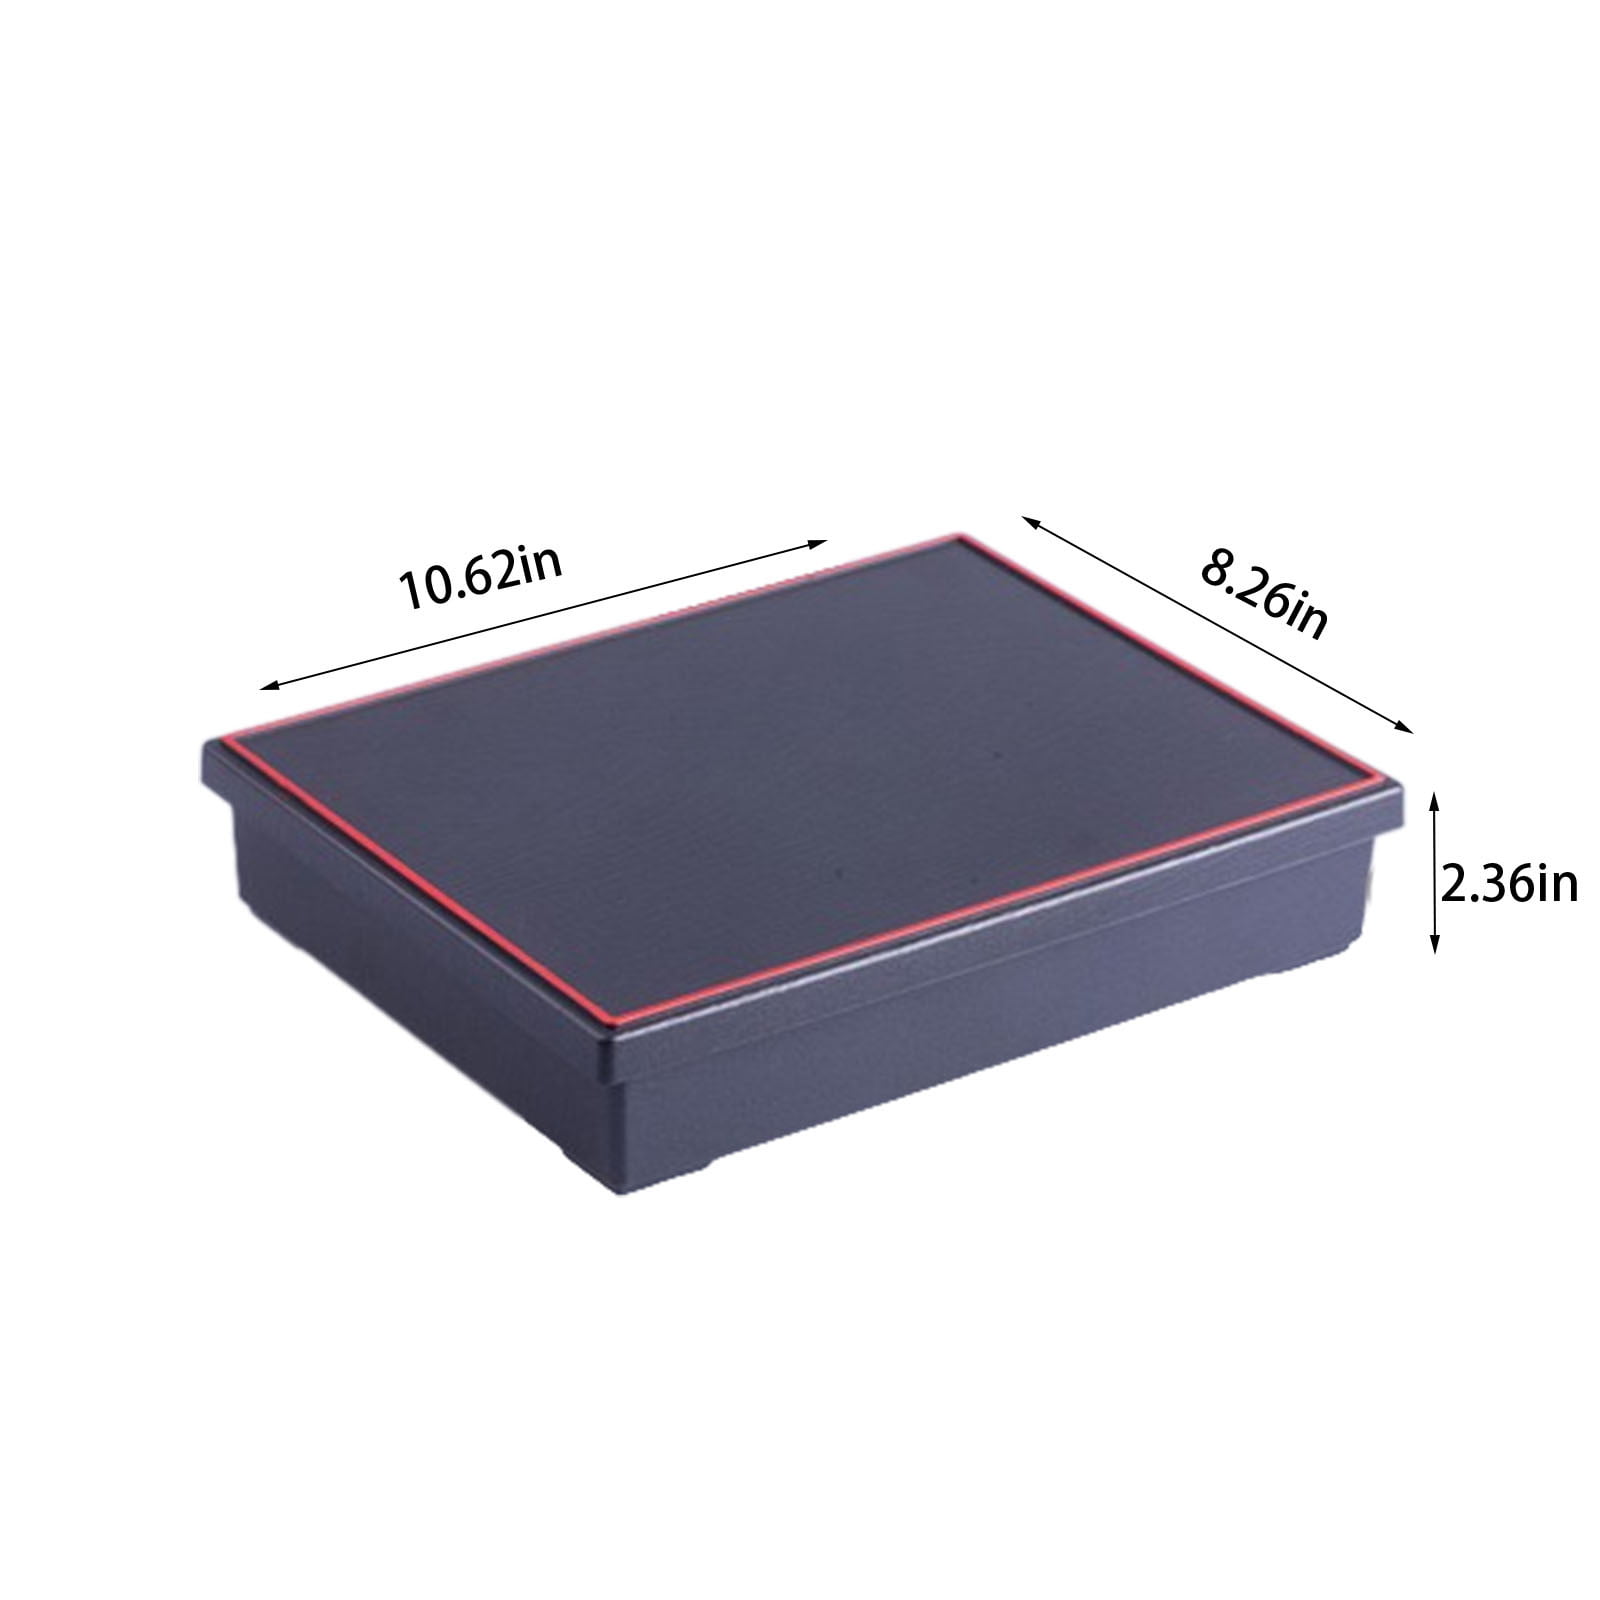  Happy Sales HSLQ-BTX9SQ, Japanese Sushi Tray Lunch Box Bento box  Traditional Plastic Lacquered Box for Restaurant or Home Made in Japan,  Square Design Red and Black: Home & Kitchen